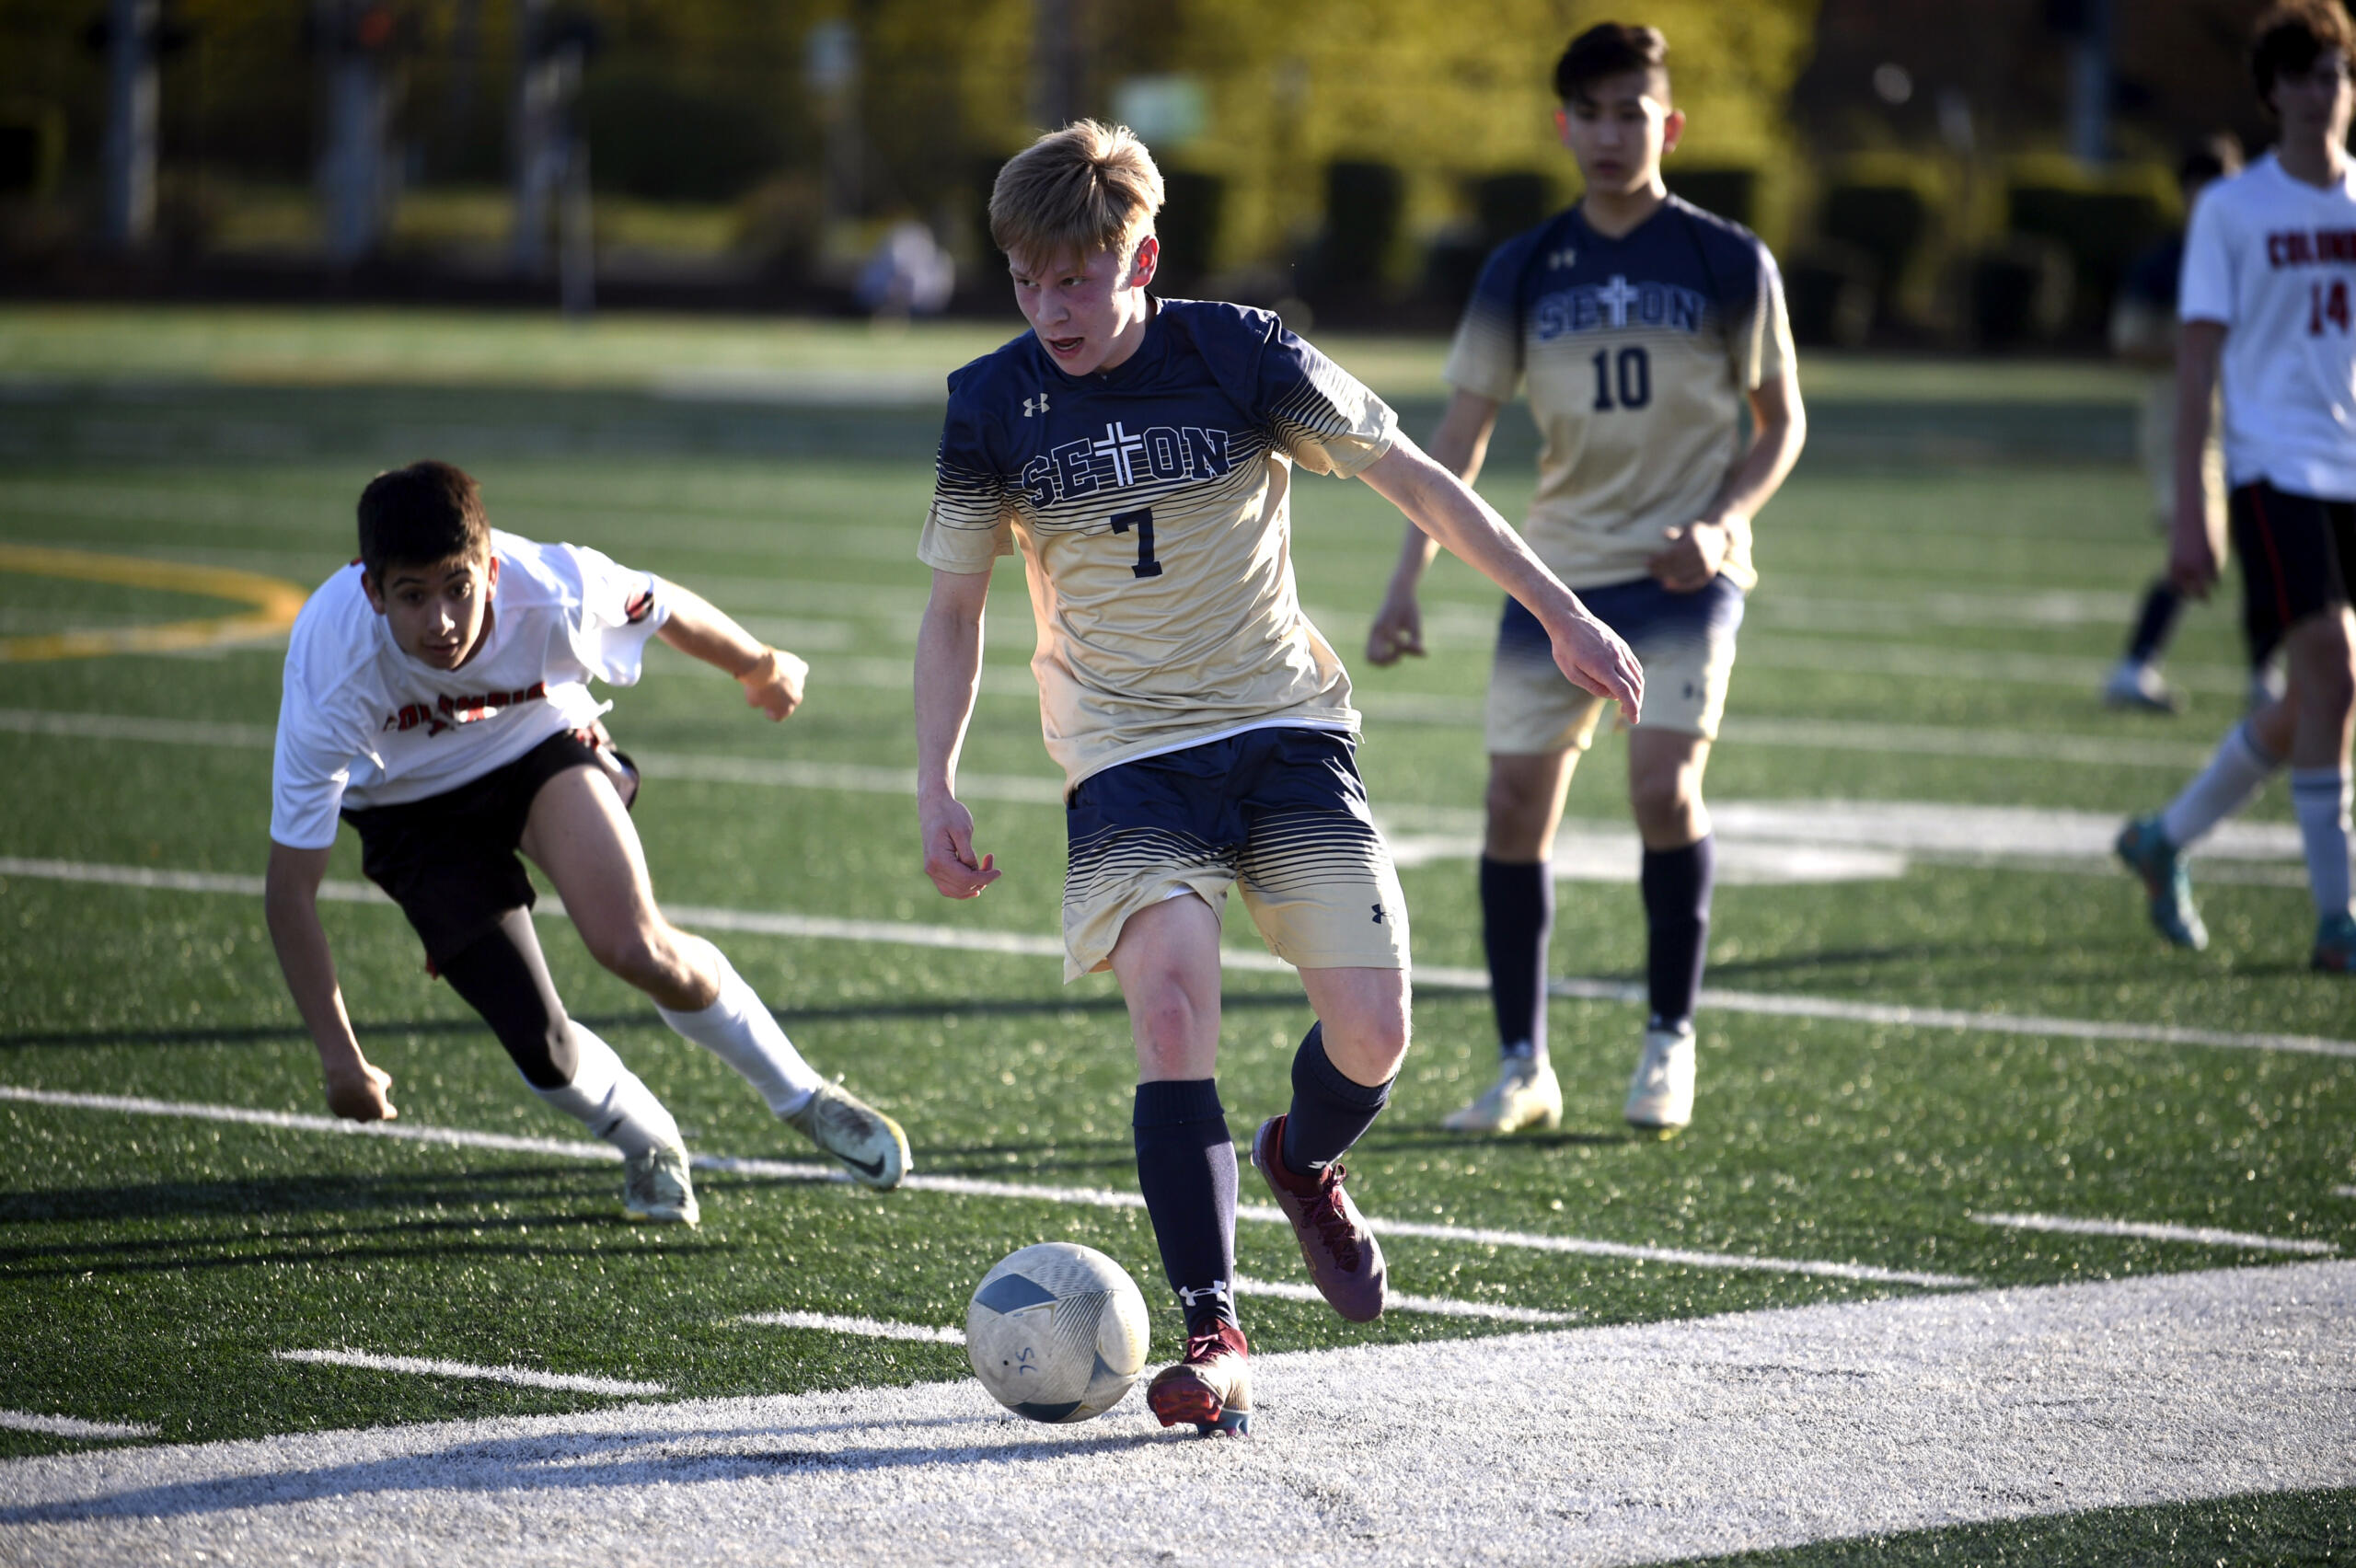 Seton Catholic’s Eli Wall looks up the field while dribbling the ball during a Trico League boys soccer game on Tuesday, April 25, 2023, at Seton Catholic High School.